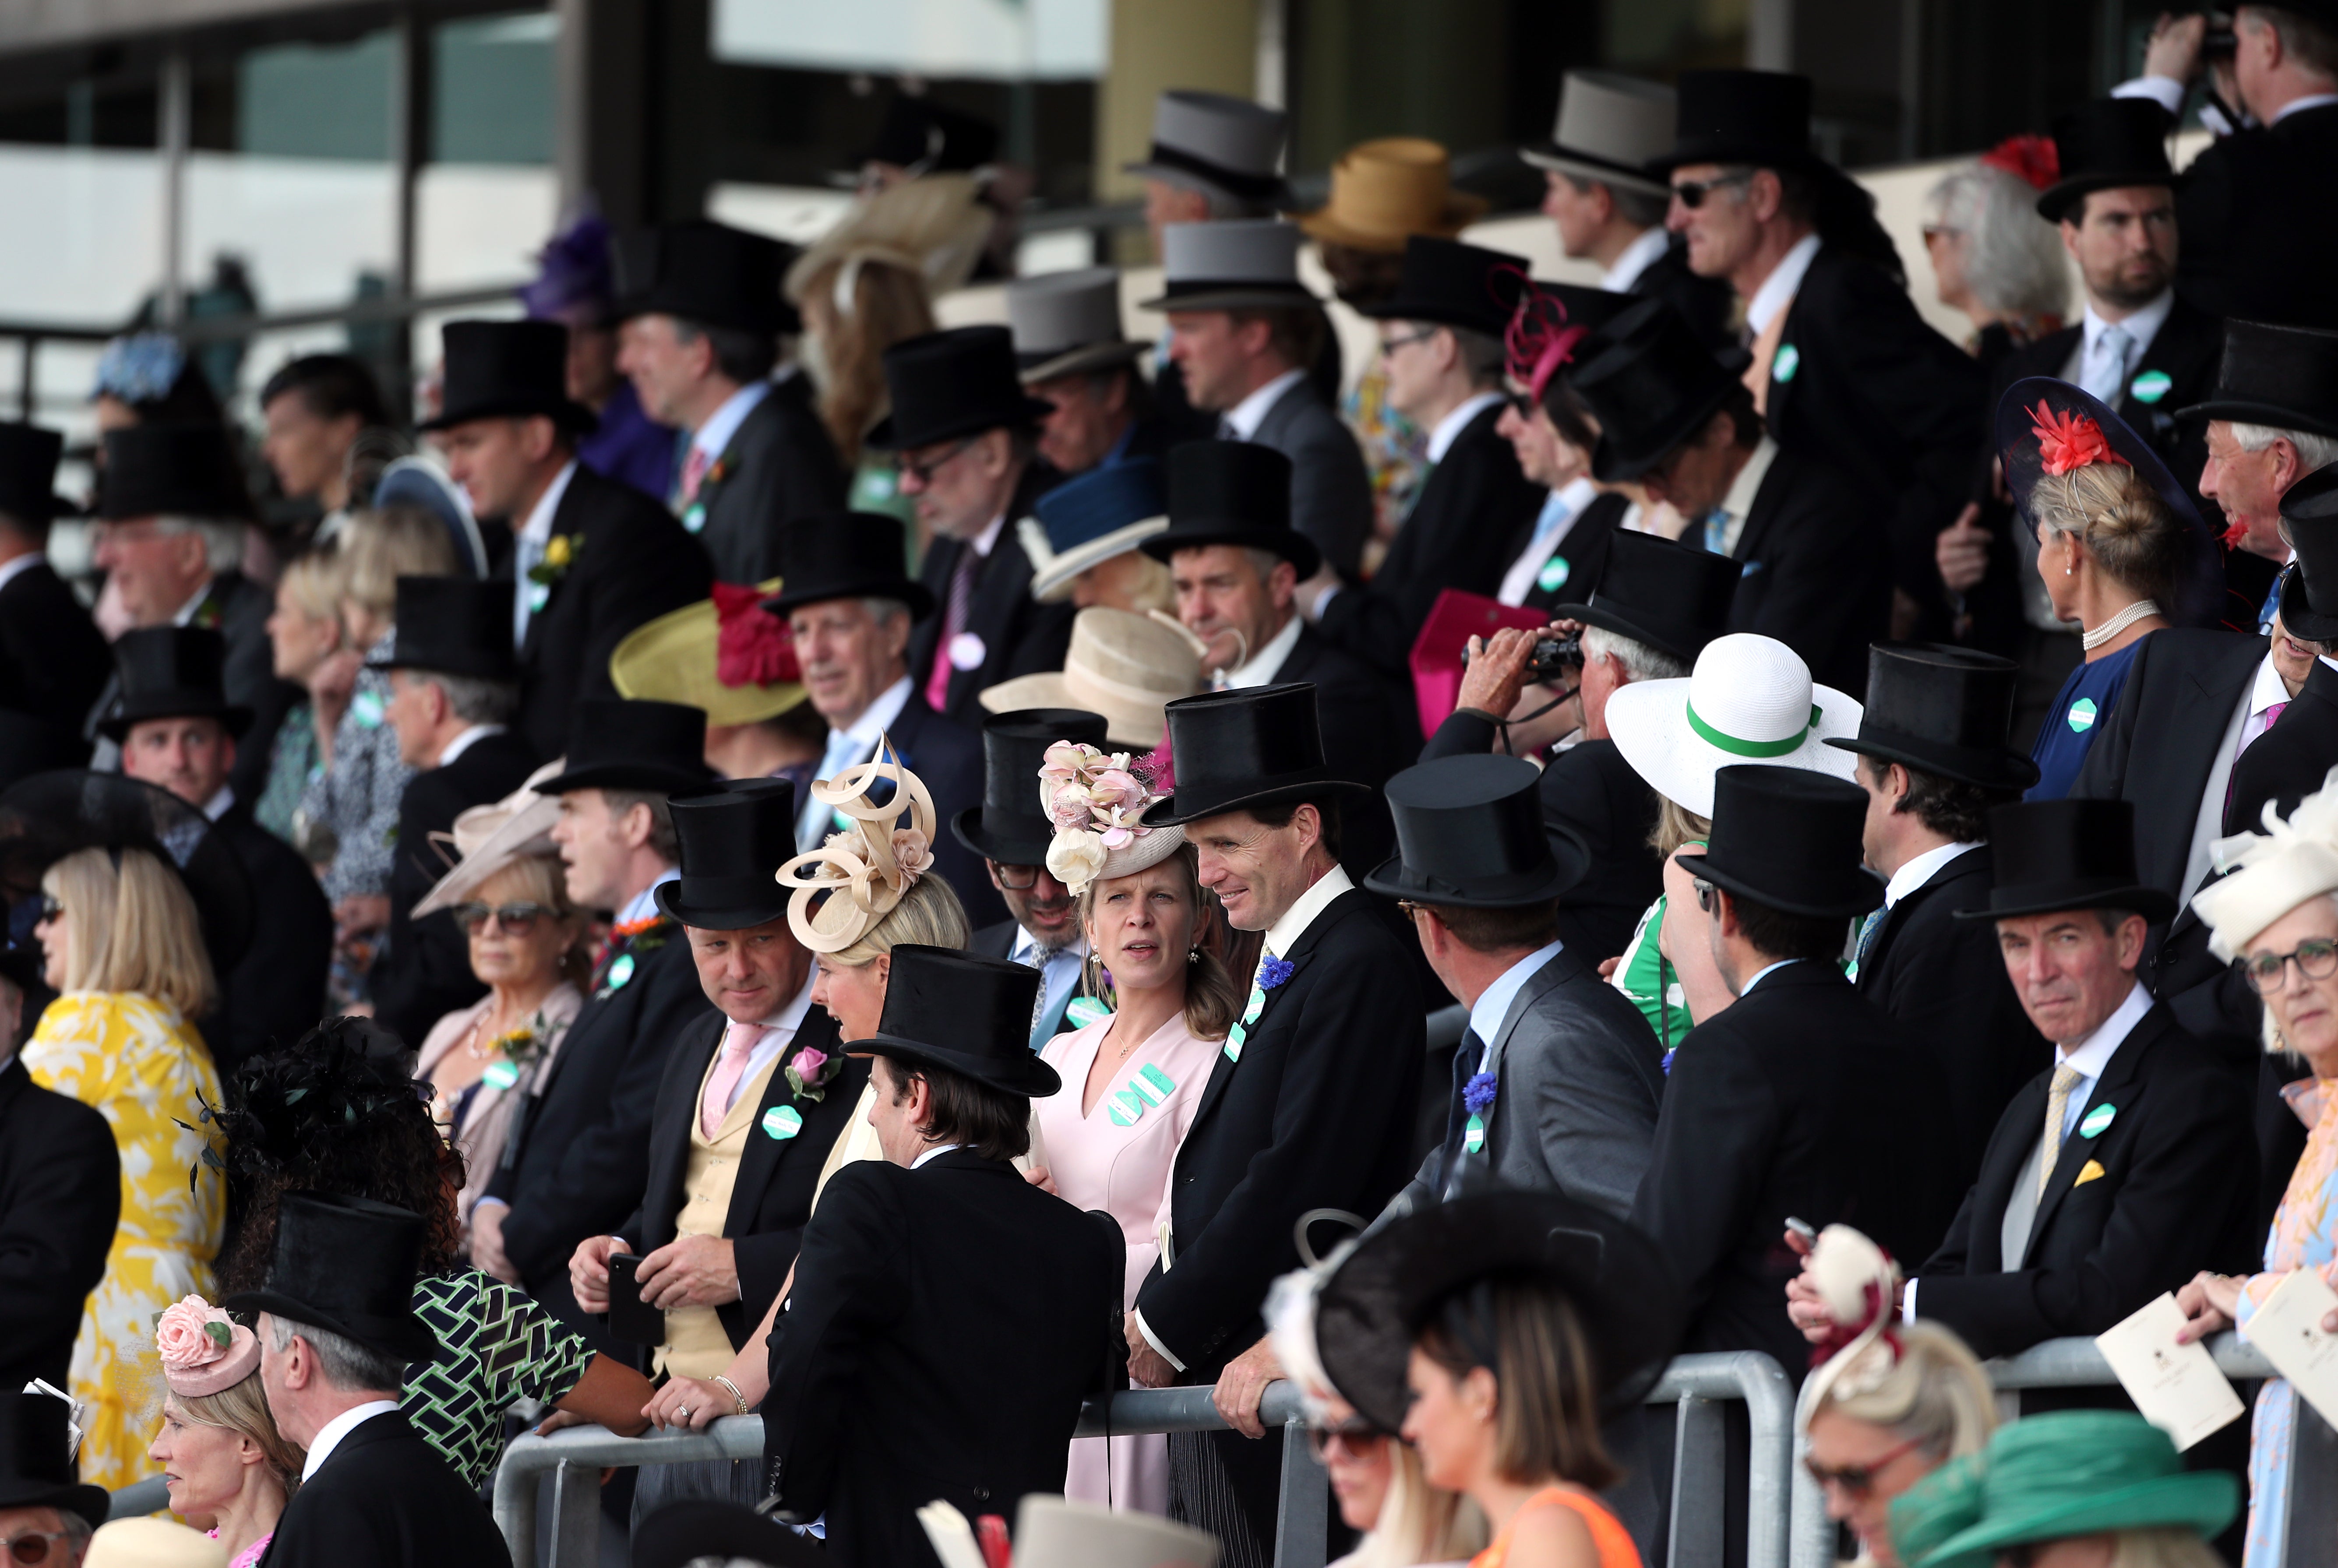 Racegoers in the stands during day one of Royal Ascot